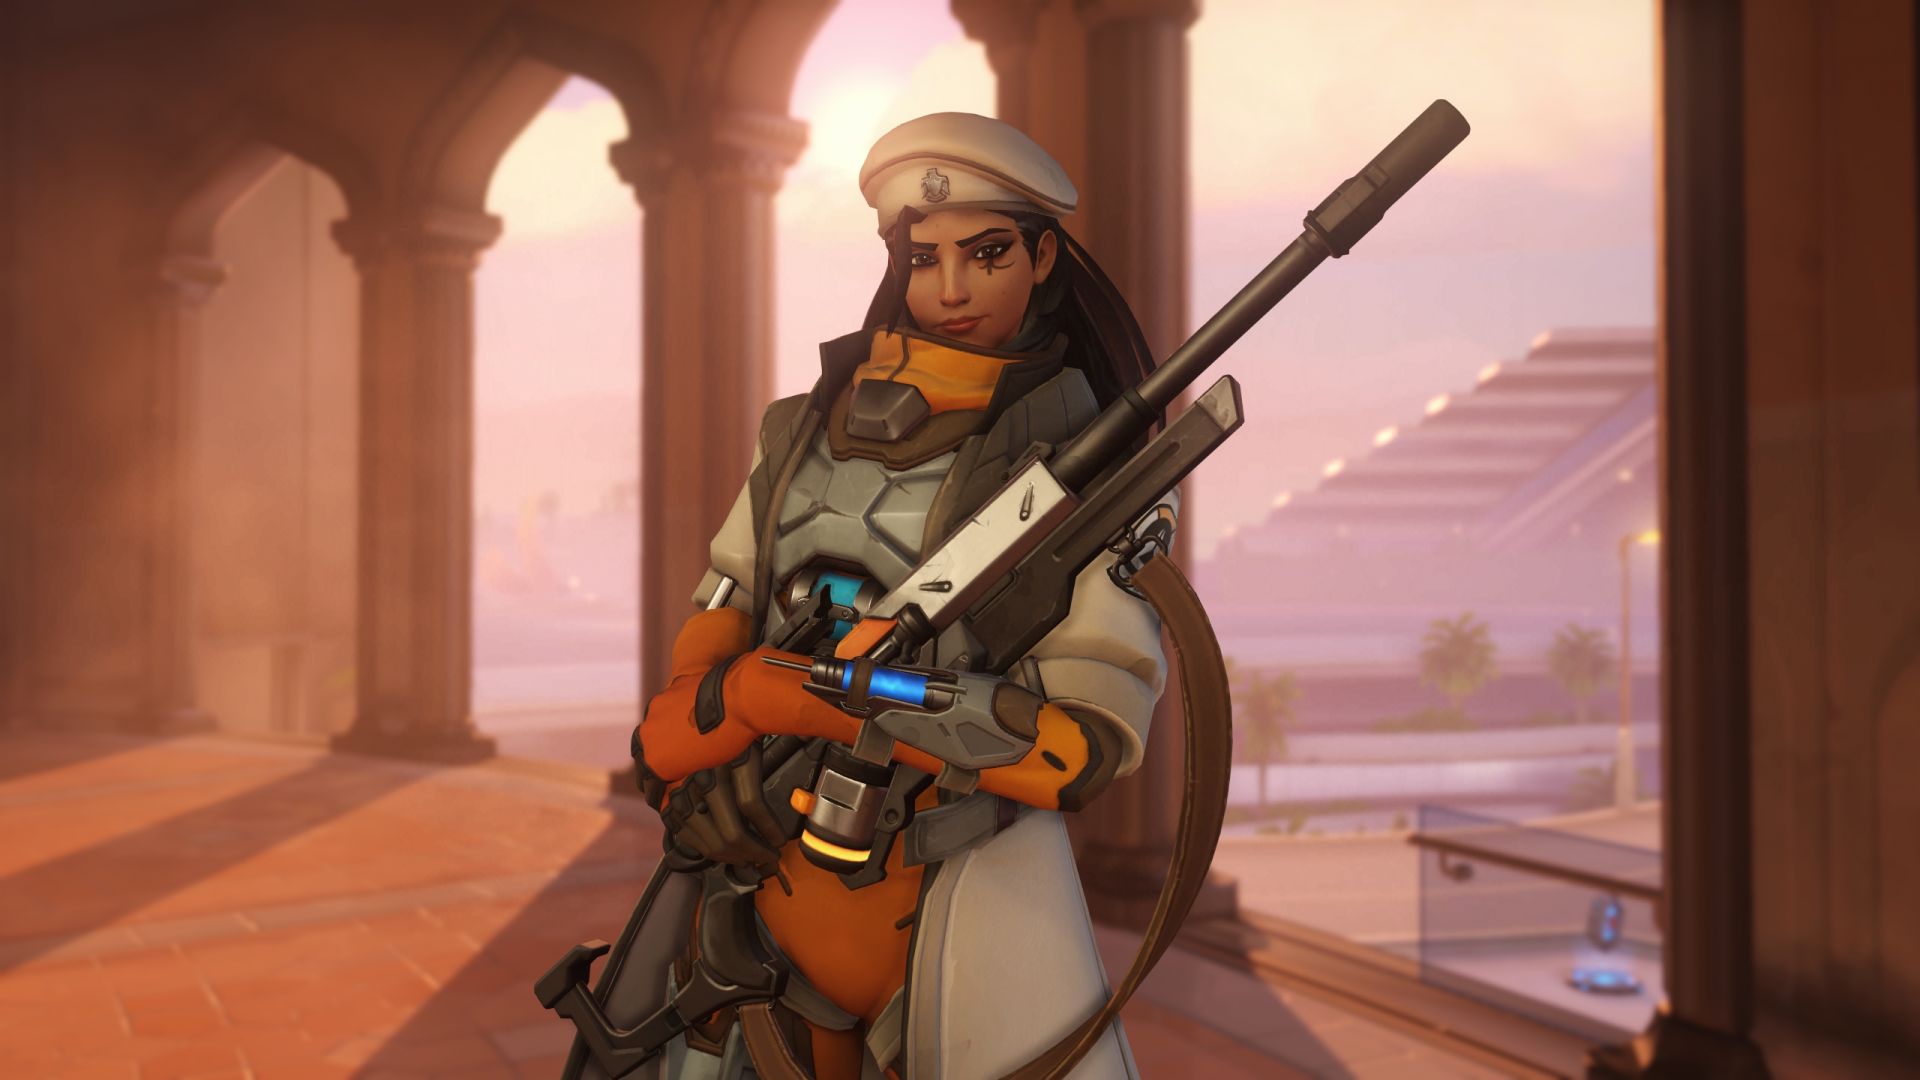 Wallpaper Ana, overwatch game, video game